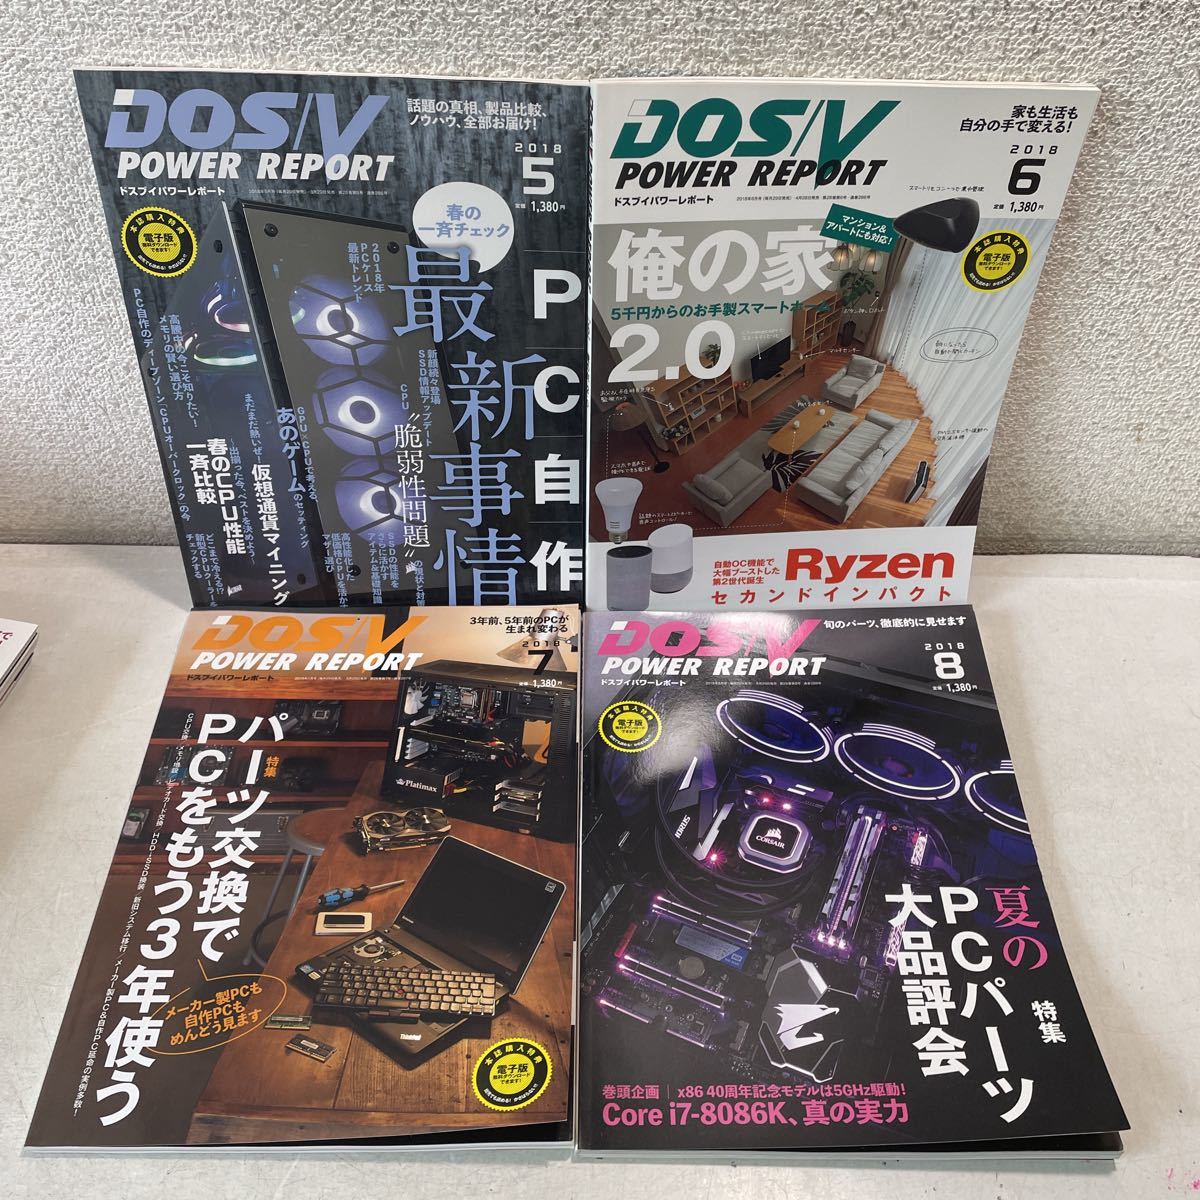 230210★U00★DOS/V POWER REPORT ドスブイパワーレポート 2018年1月号〜12月号 揃い12冊セット★パソコン誌_画像5